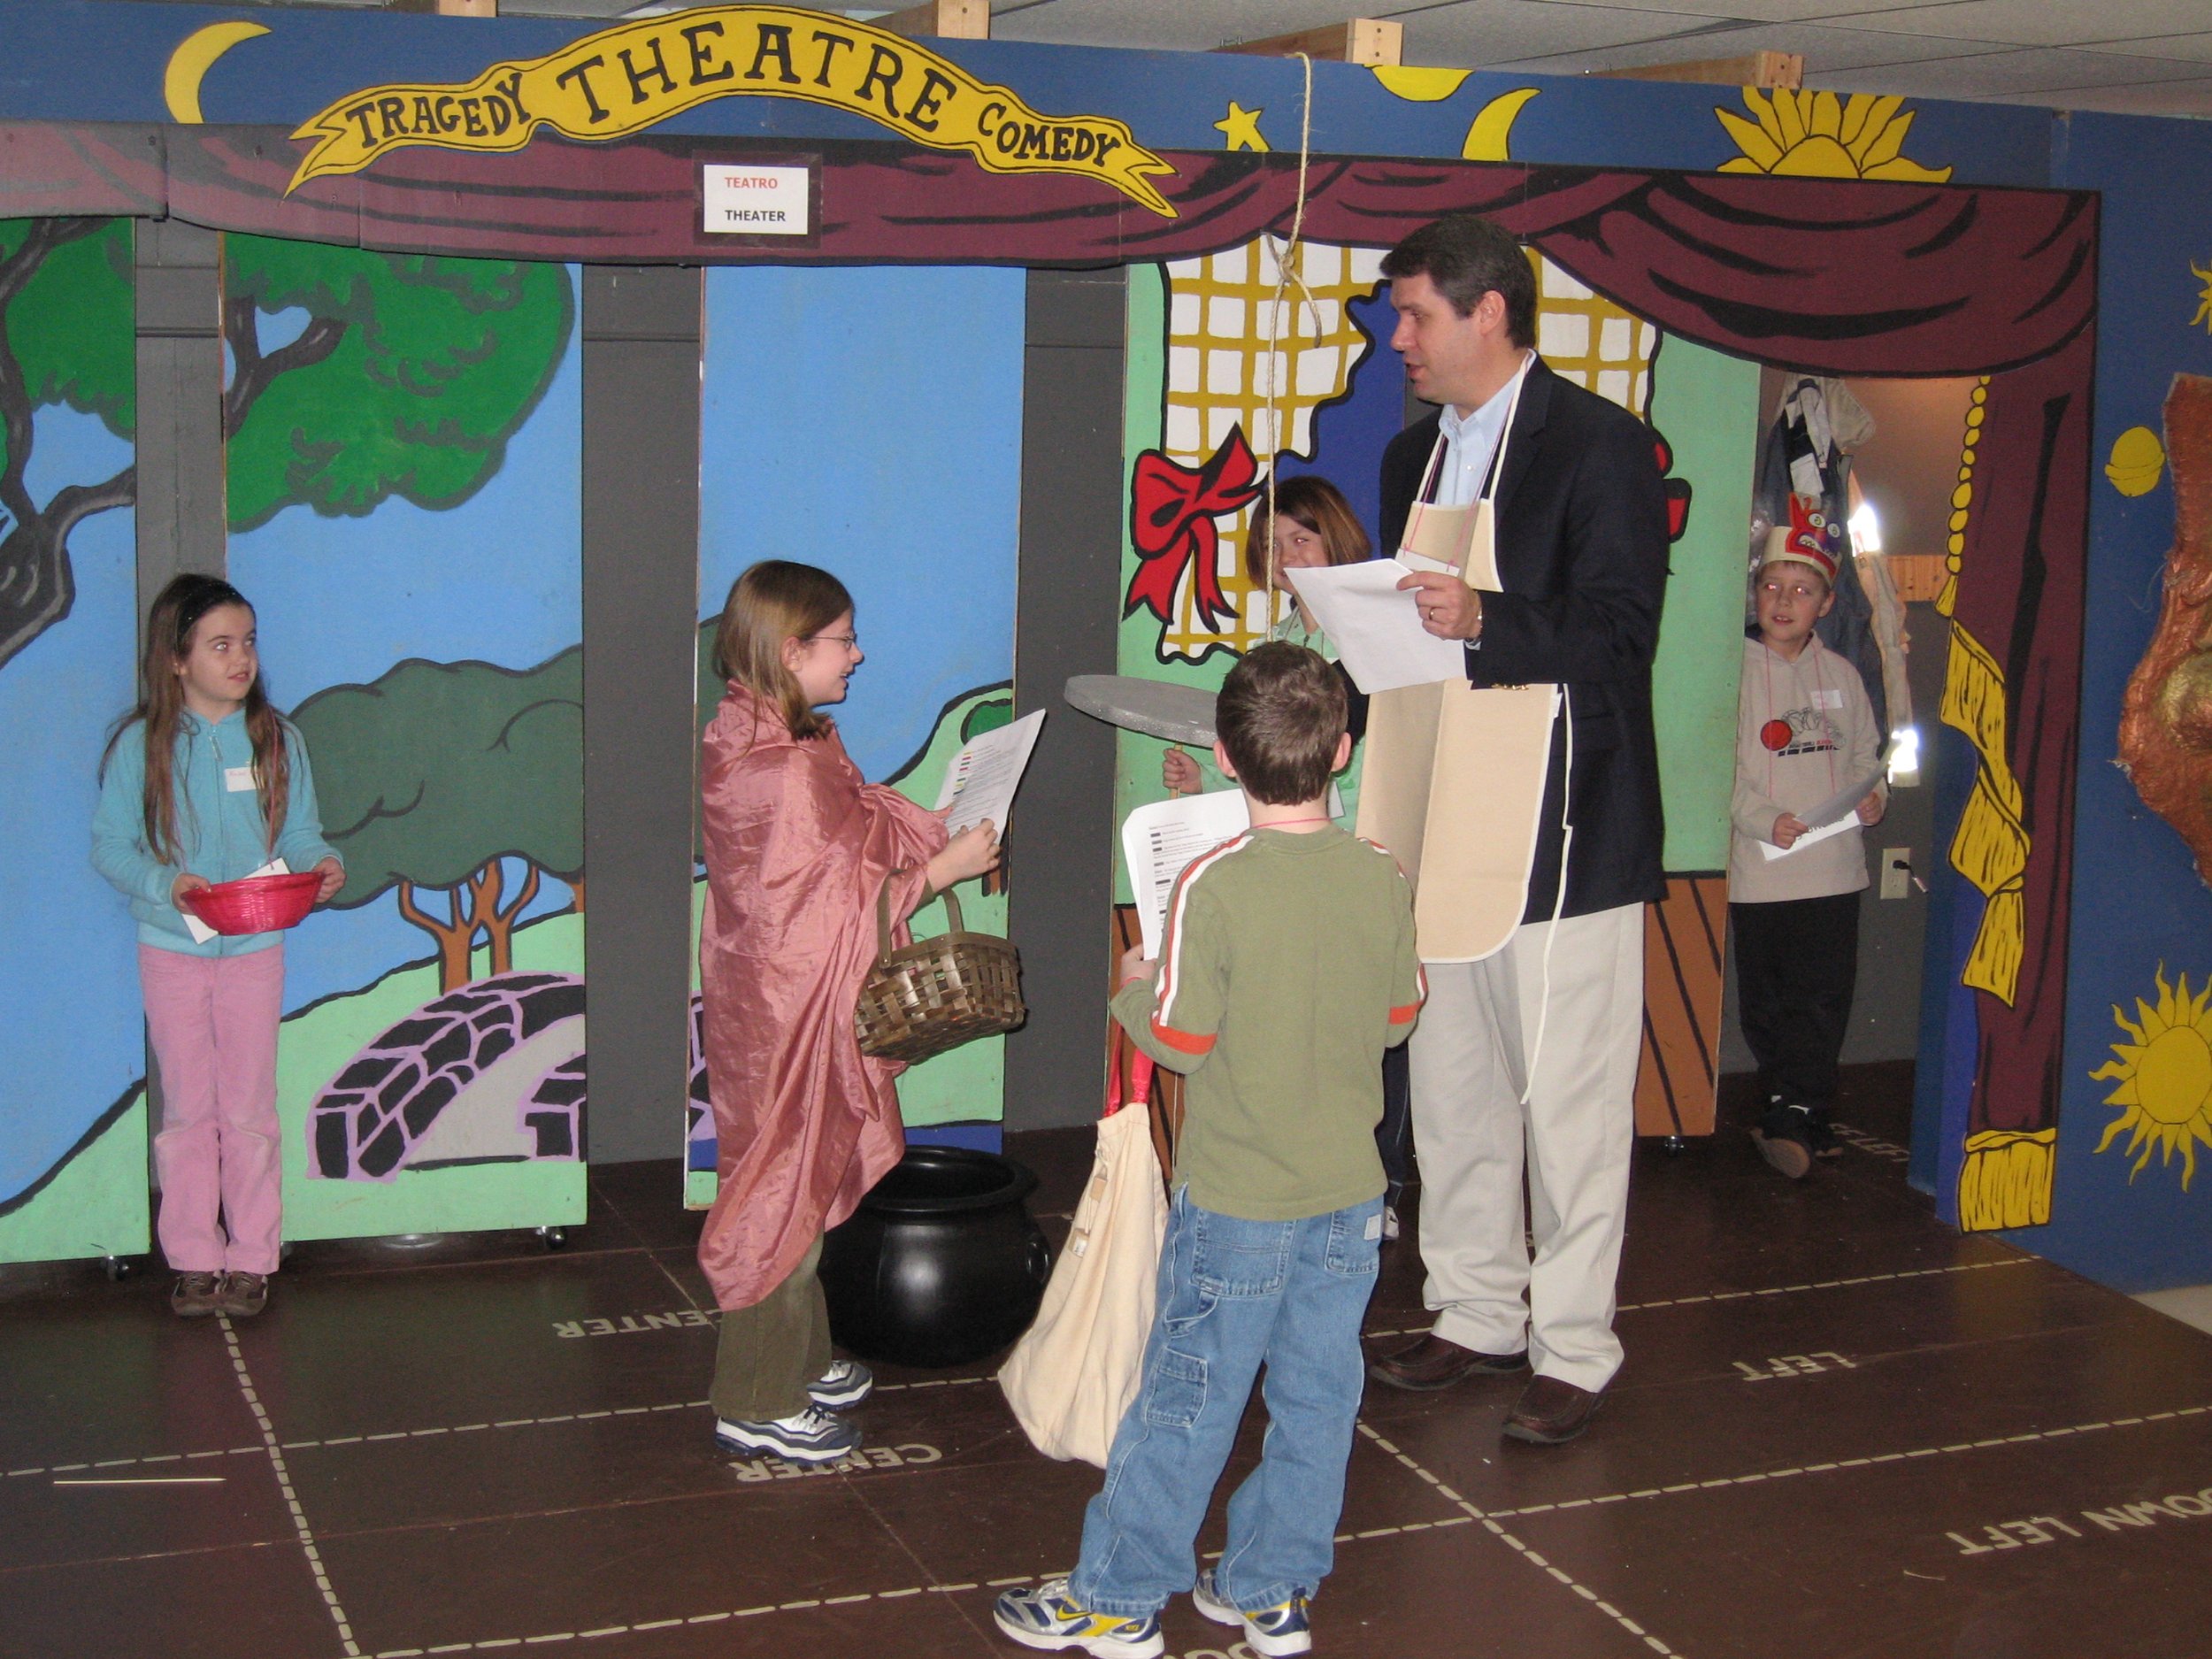  Board member Todd Rhea helps with the “Three Little Pigs” field trip.  